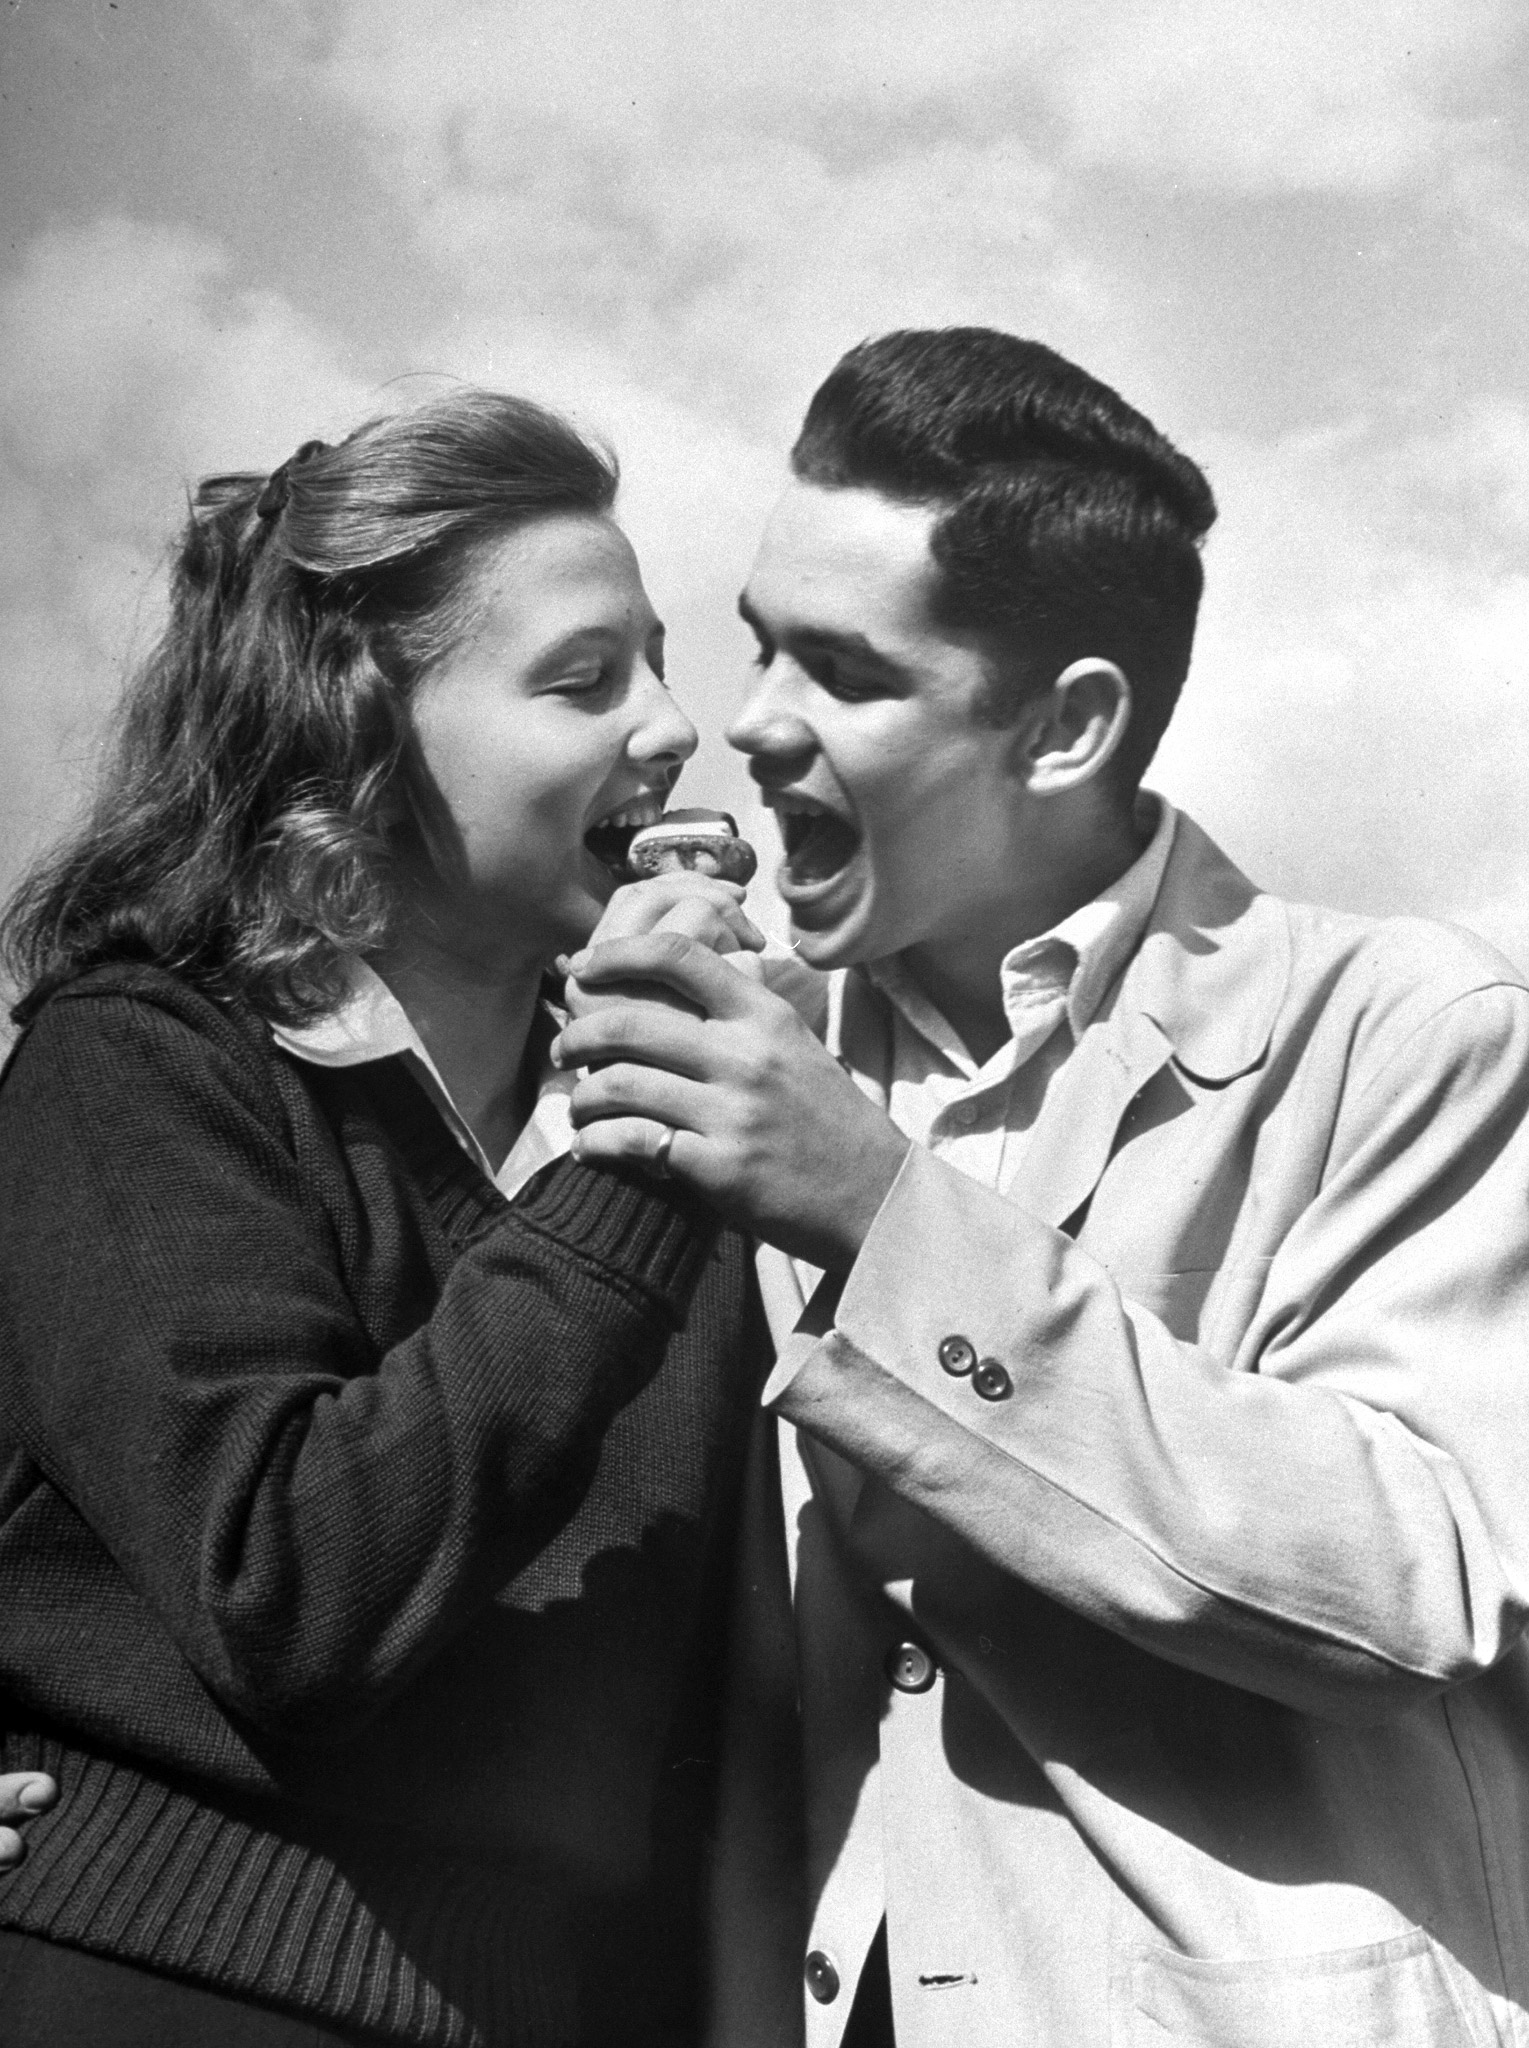 Teenagers eating an ice cream cone together, 1947.